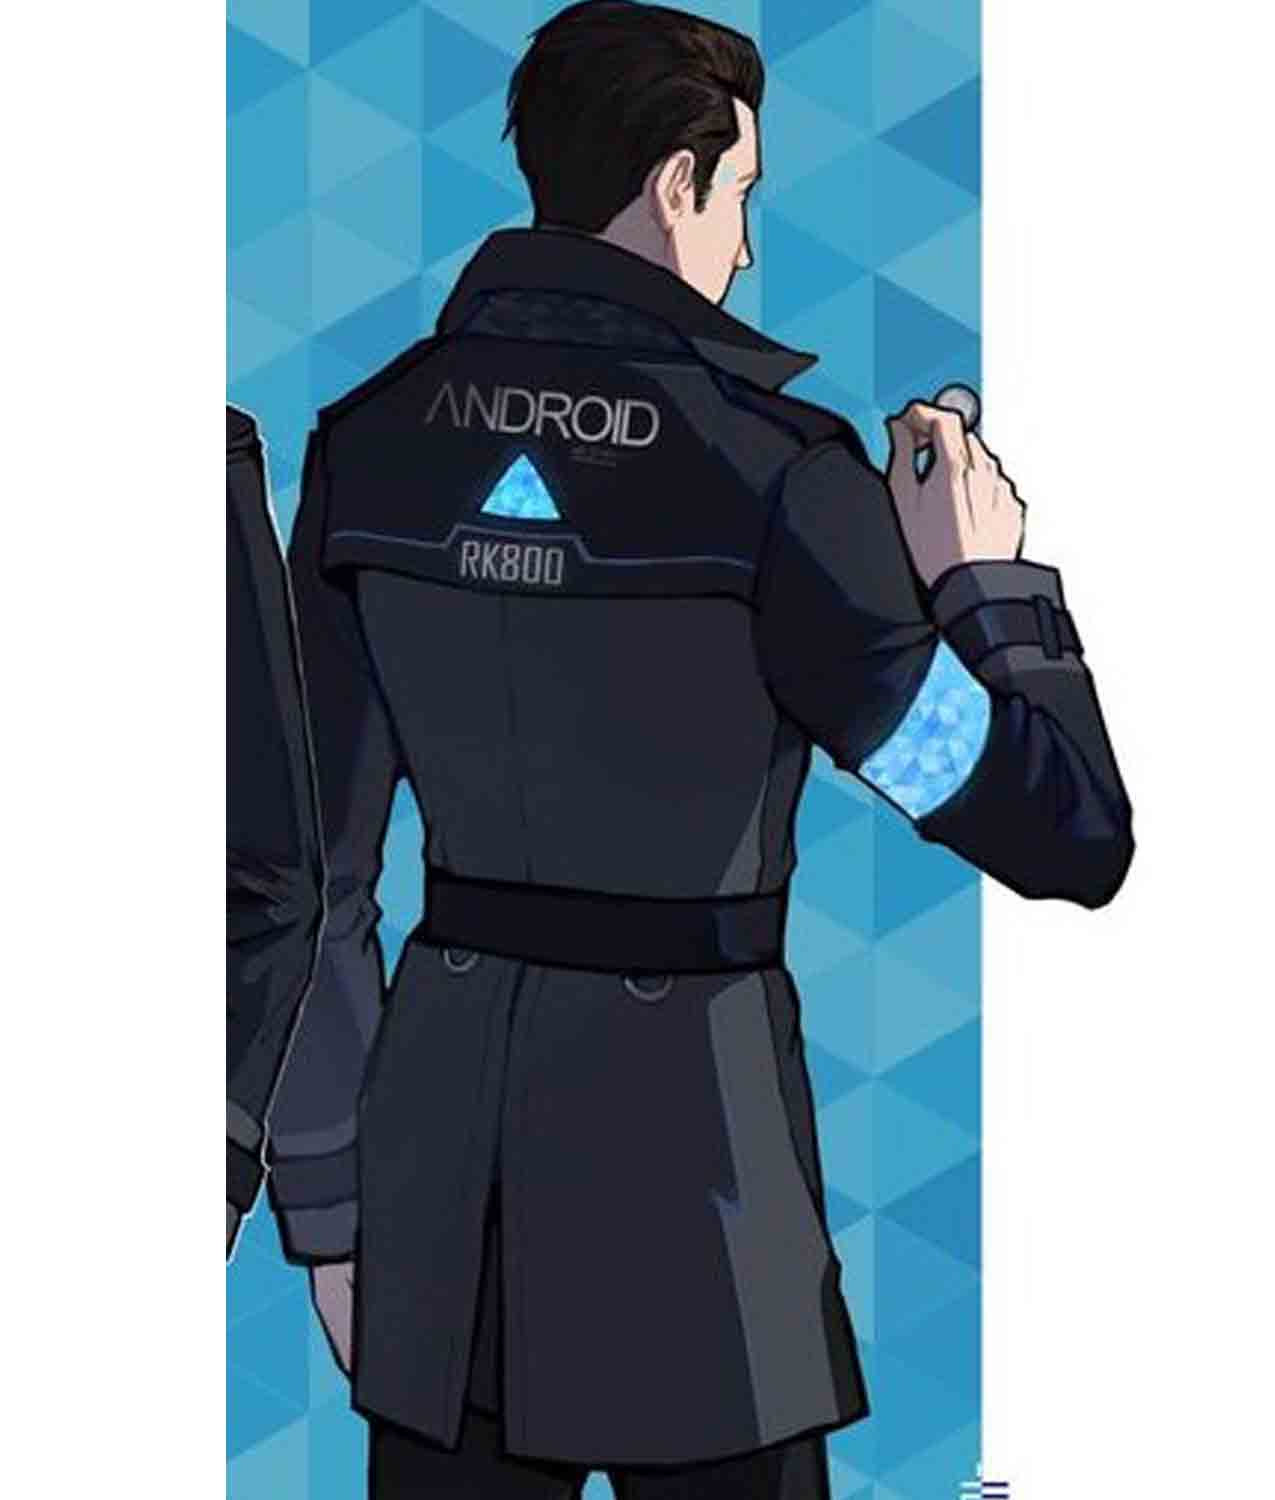 Connor Detroit Become Human Jacket